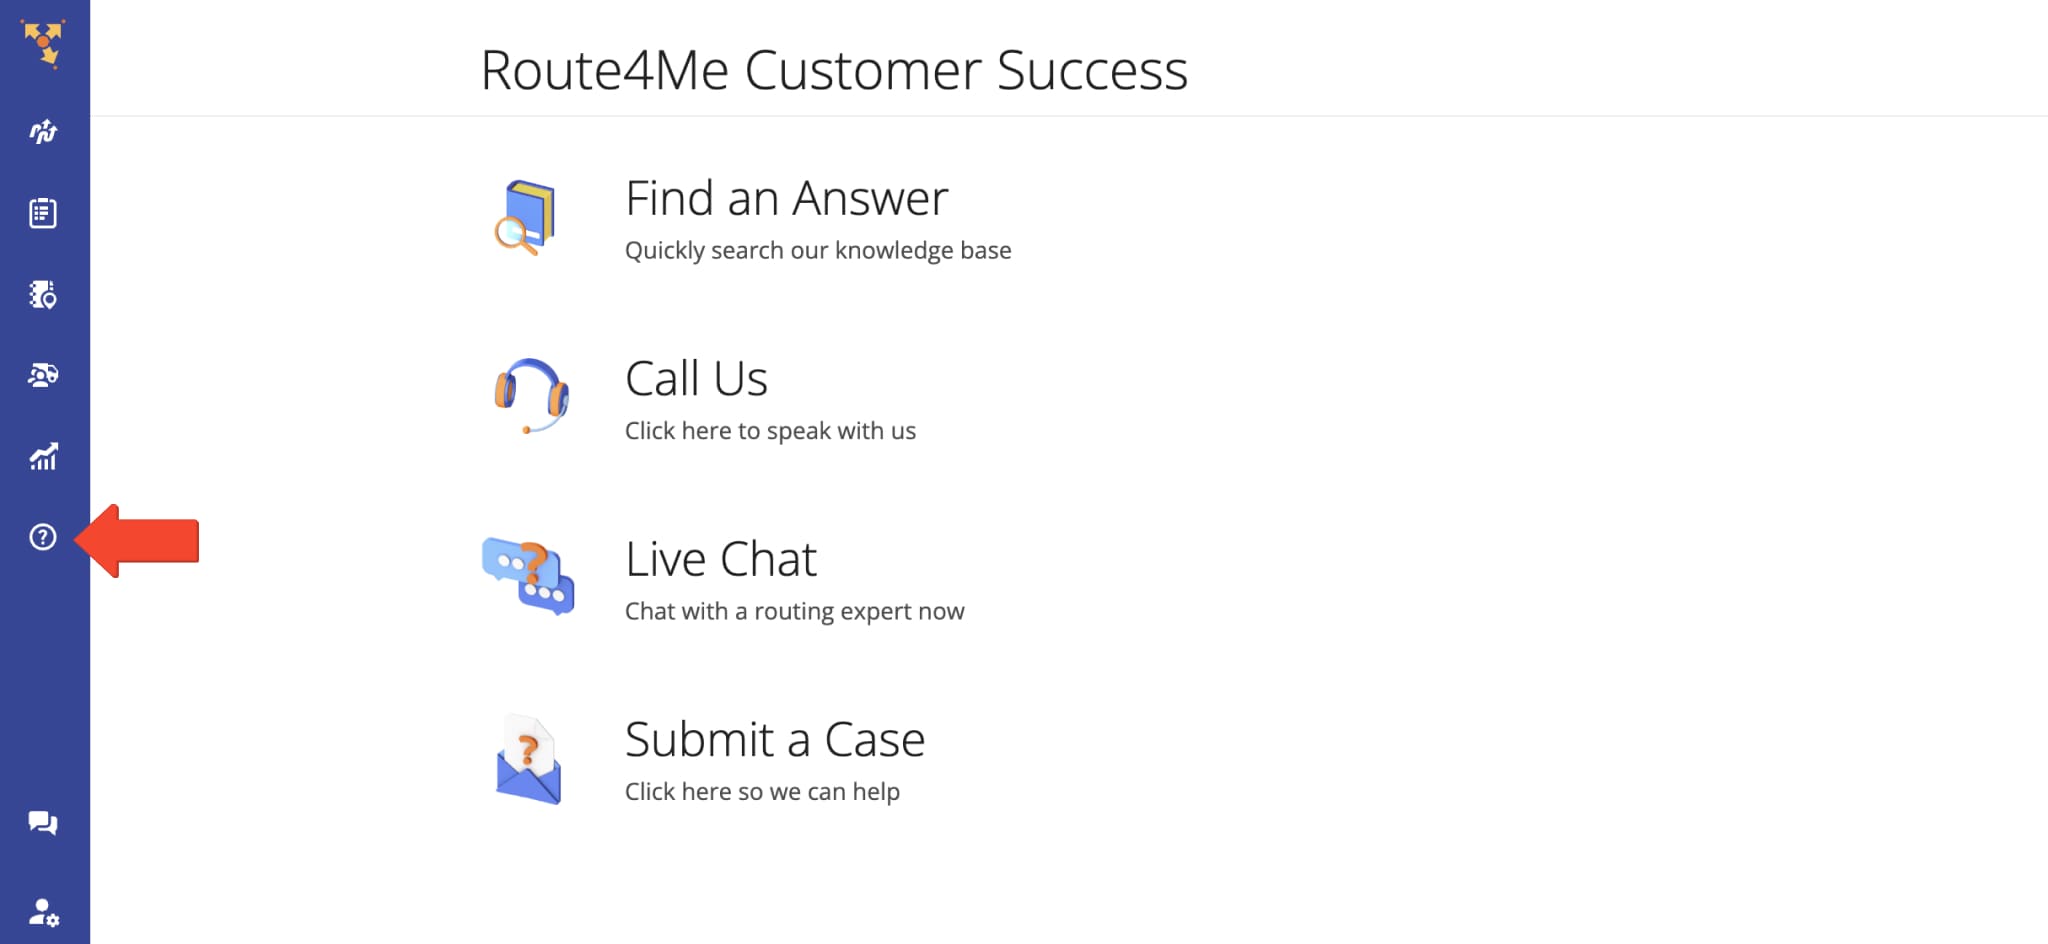 Contact the Route4Me Customer Success Team as a signed-in user and get software help via Phone, Live Chat, or Contact Form.